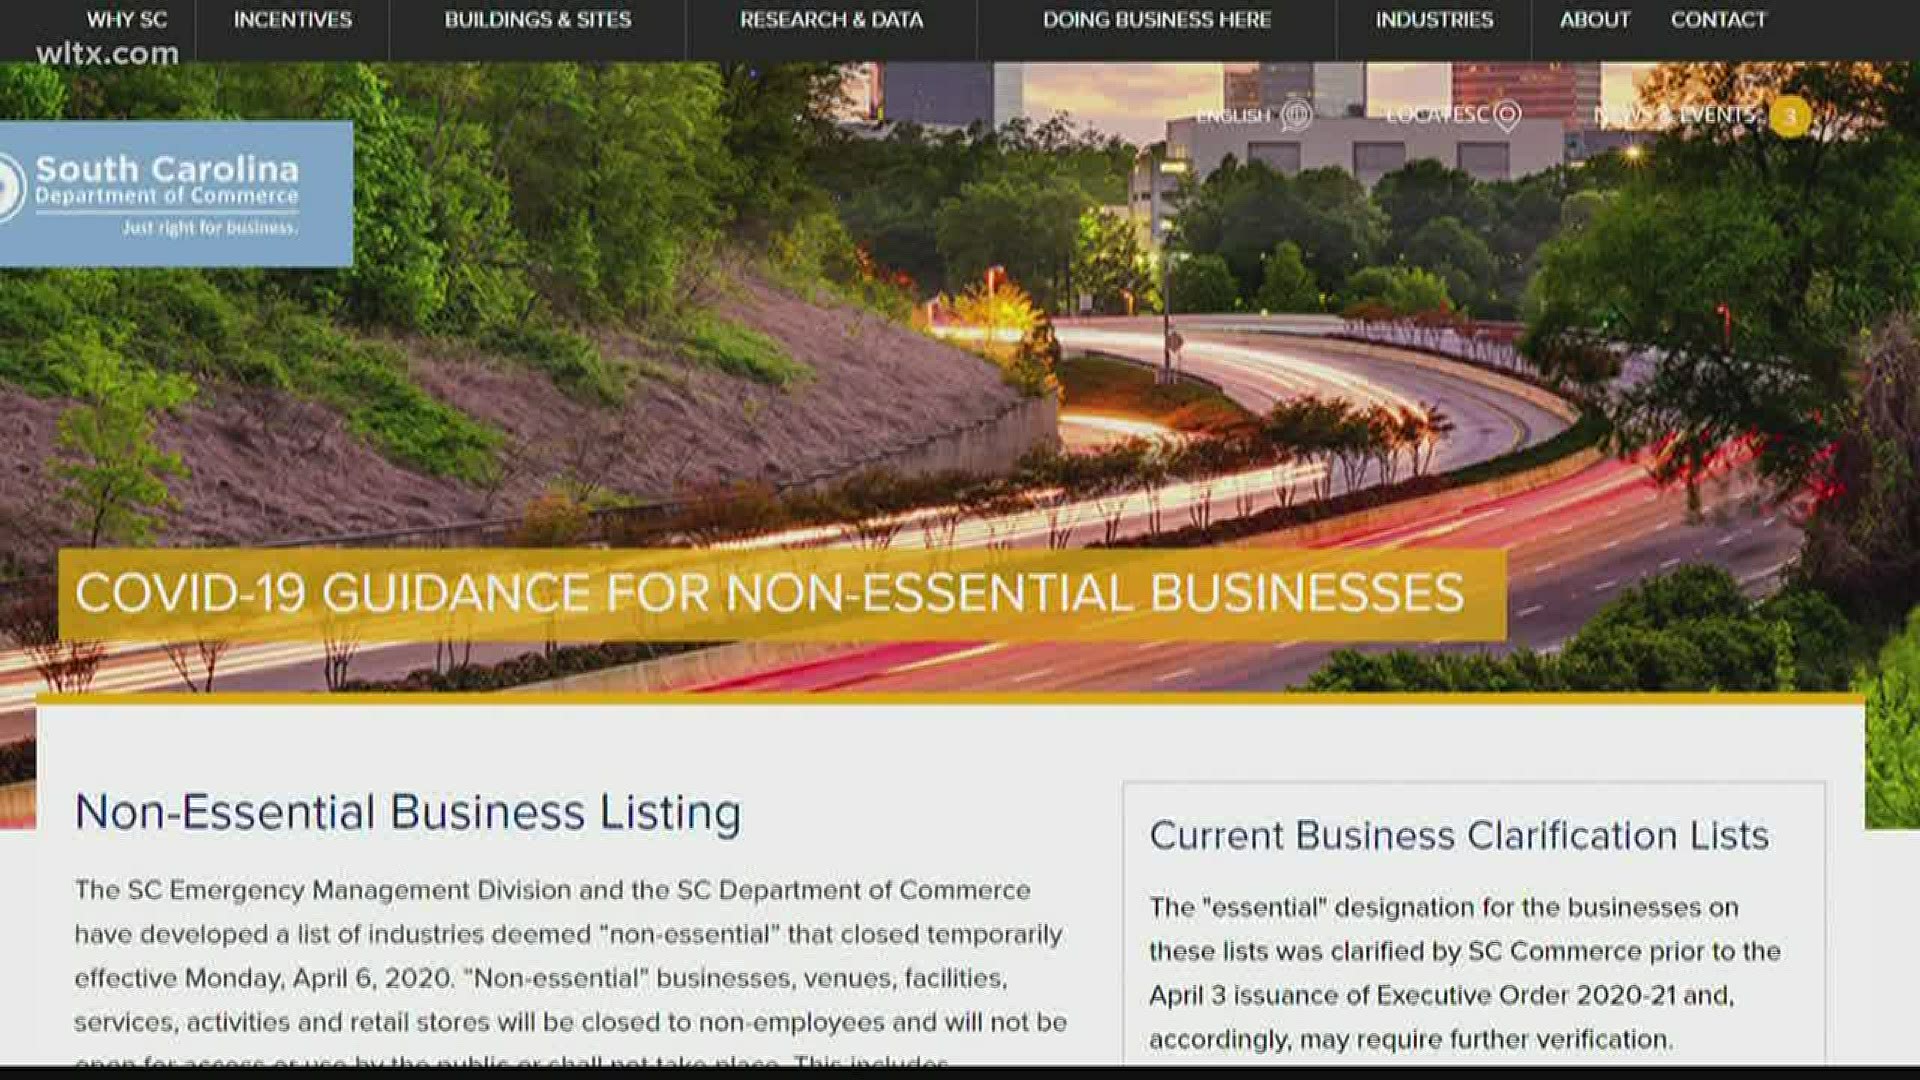 As questions surround which businesses are essential and which are not, the S.C. Dept. of Commerce has released a list of businesses that received a "clarification."